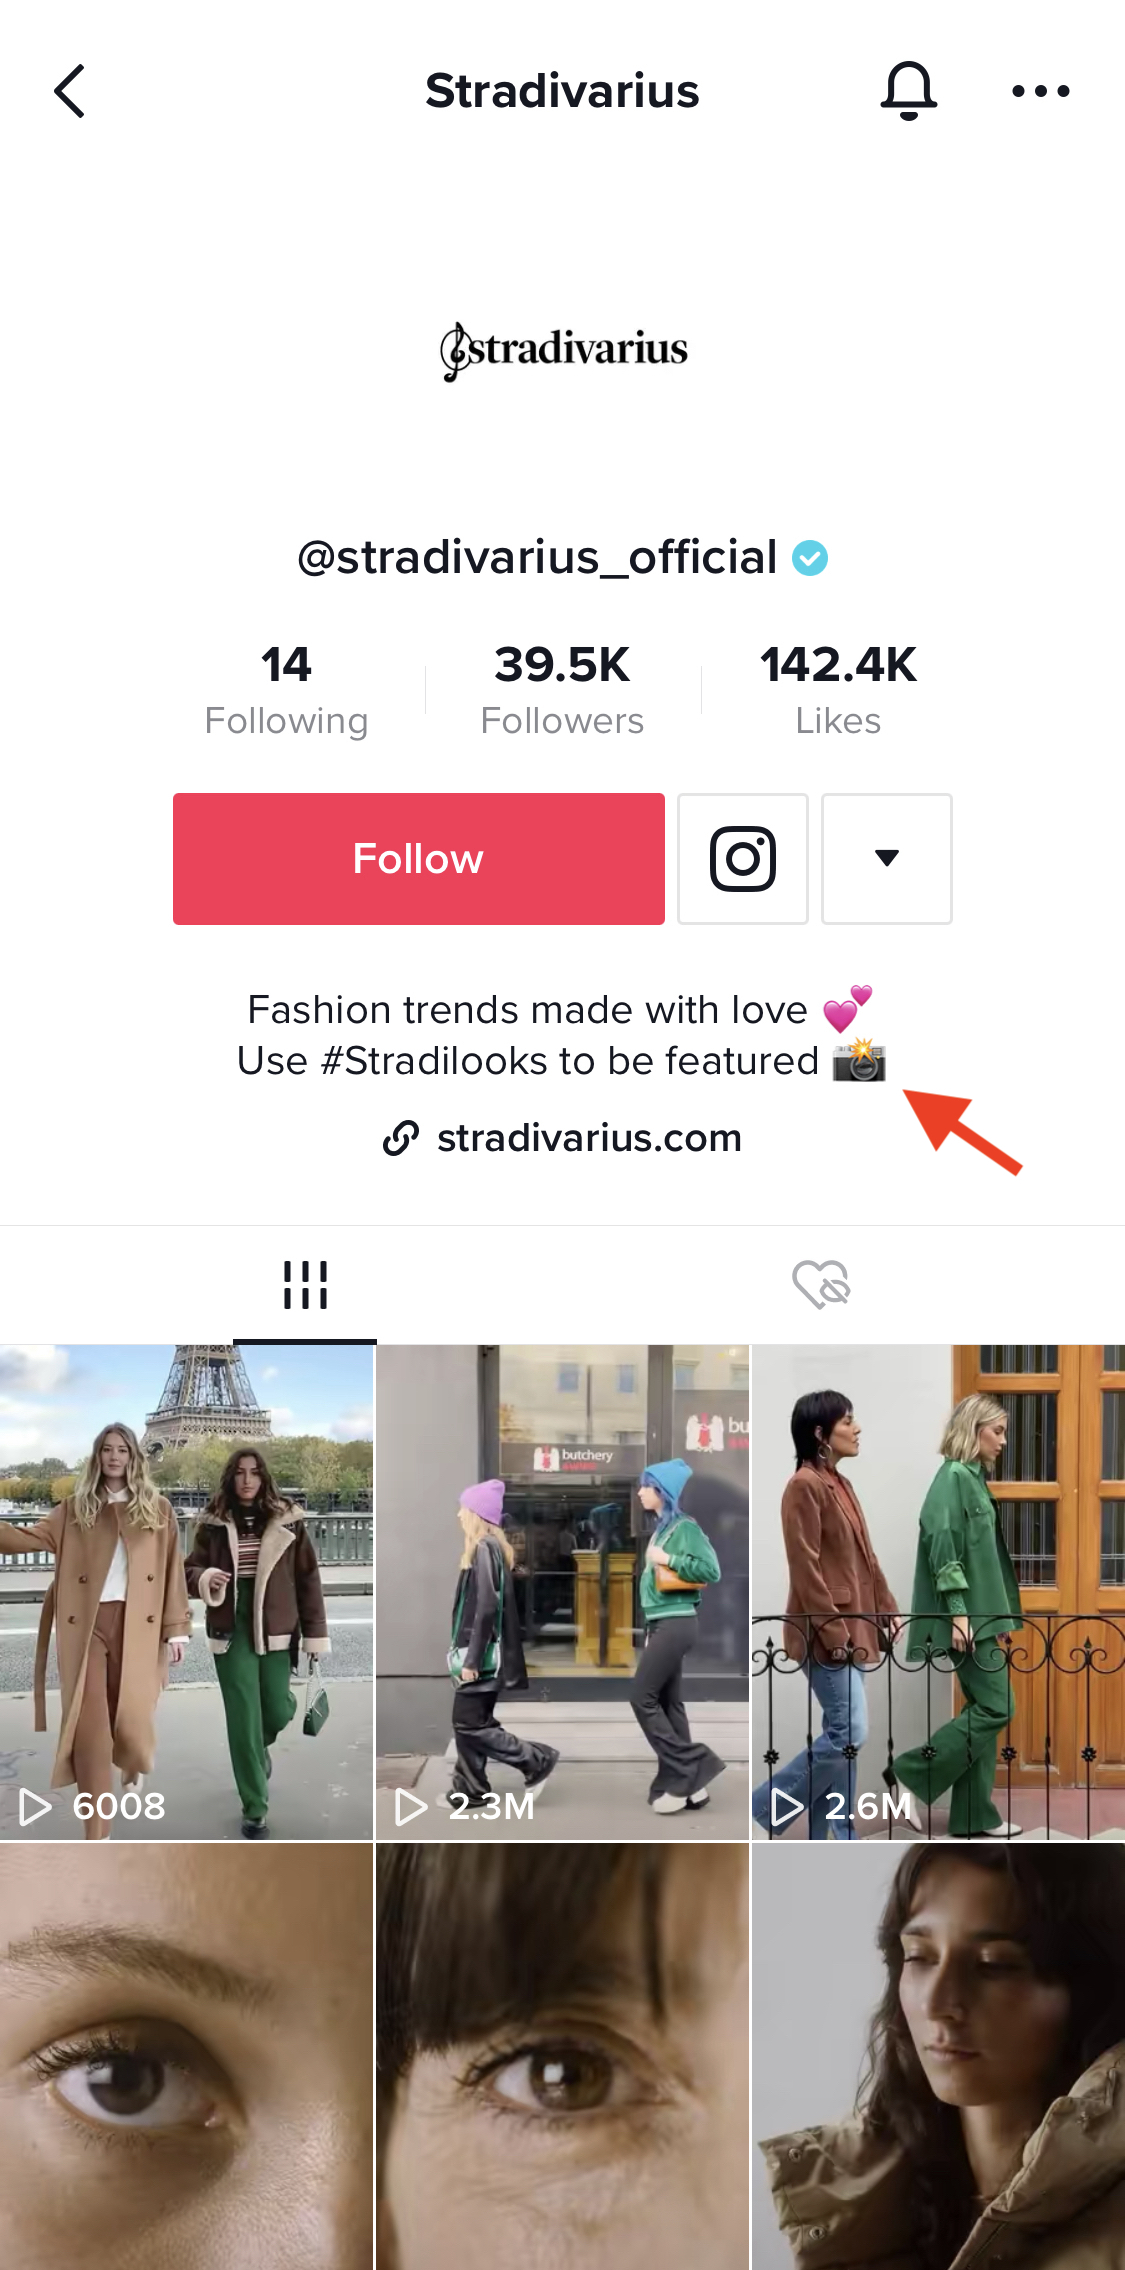 Screenshot of Stradivarius' TikTok profile, where a branded hashtag is encouraged to be used to be featured.